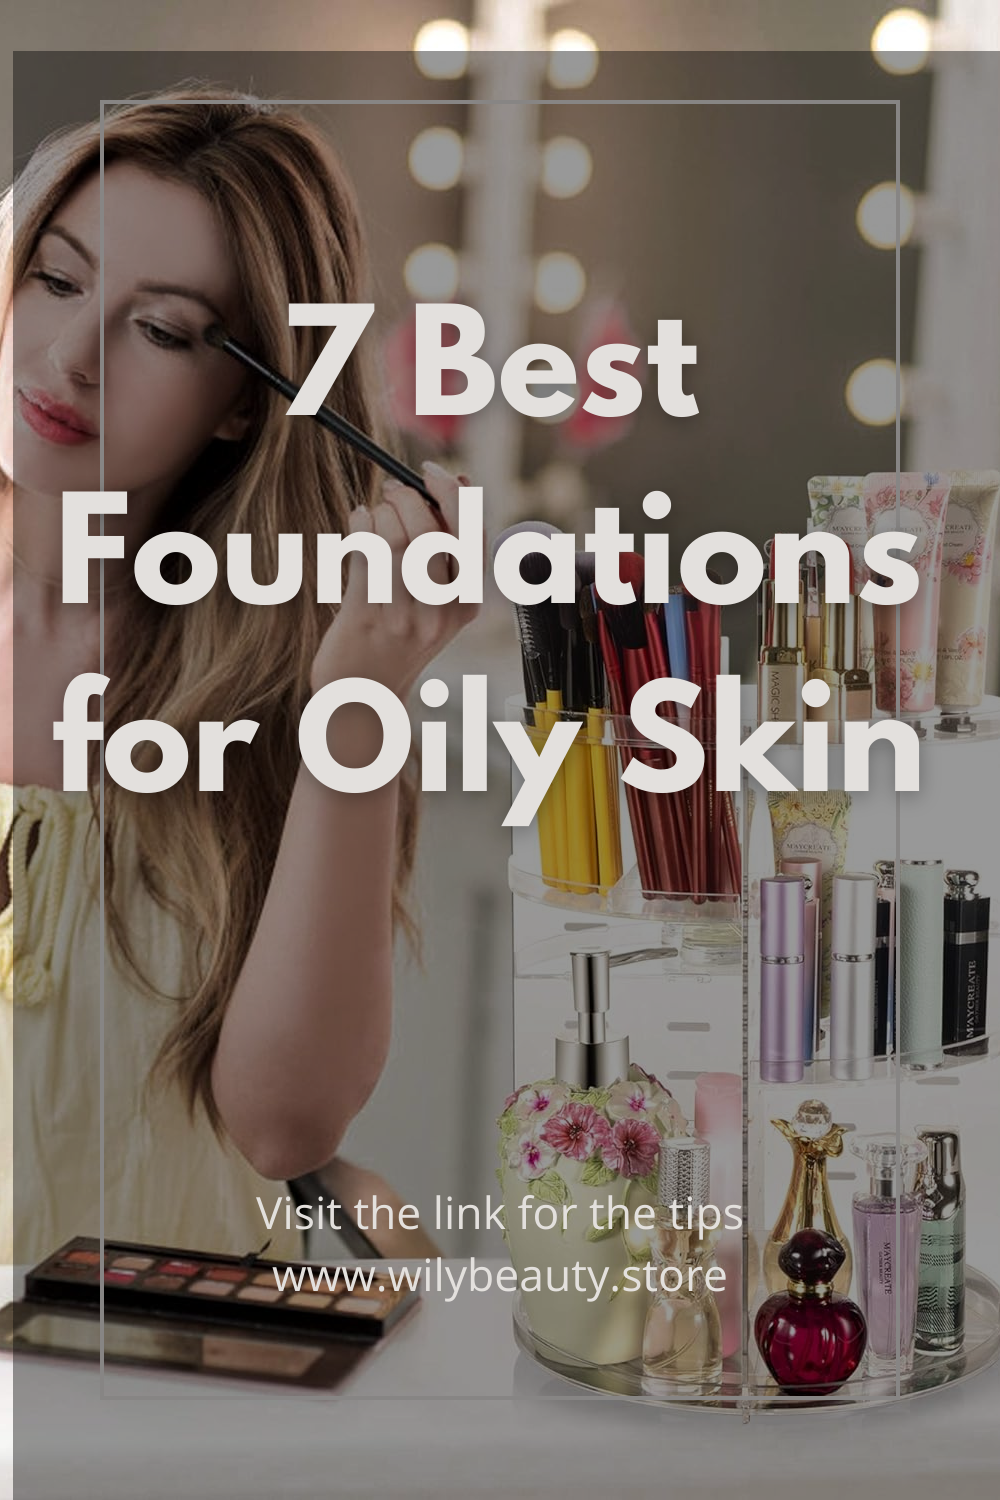 7 Best Foundations for Oily Skin